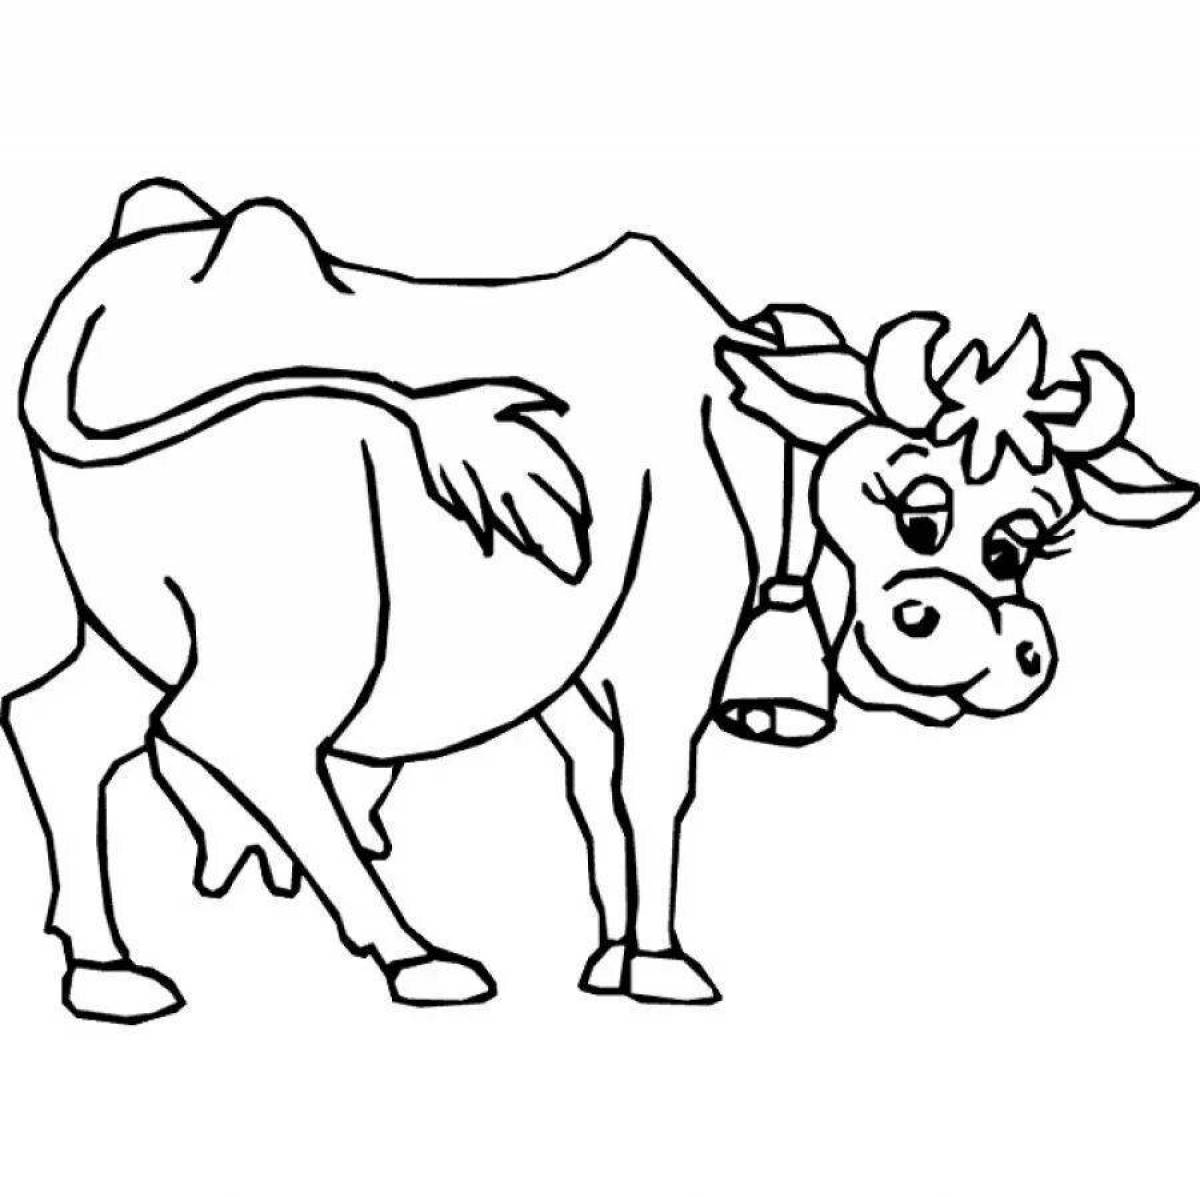 Coloring page shining cow and calf